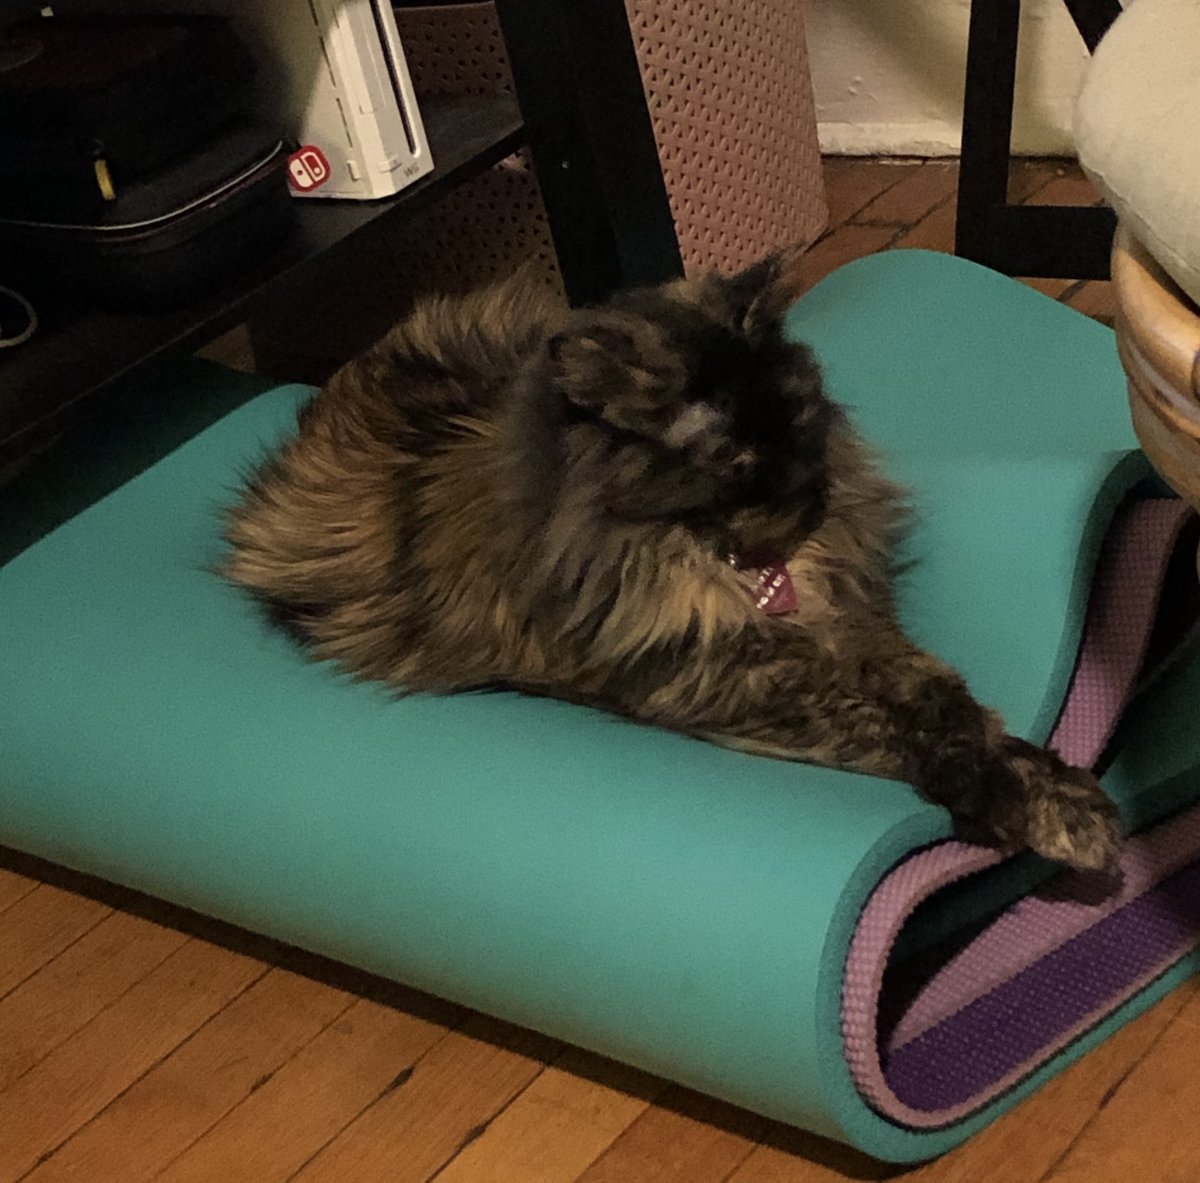 Chauncey said "no exercising for you, this is my yoga mat now"